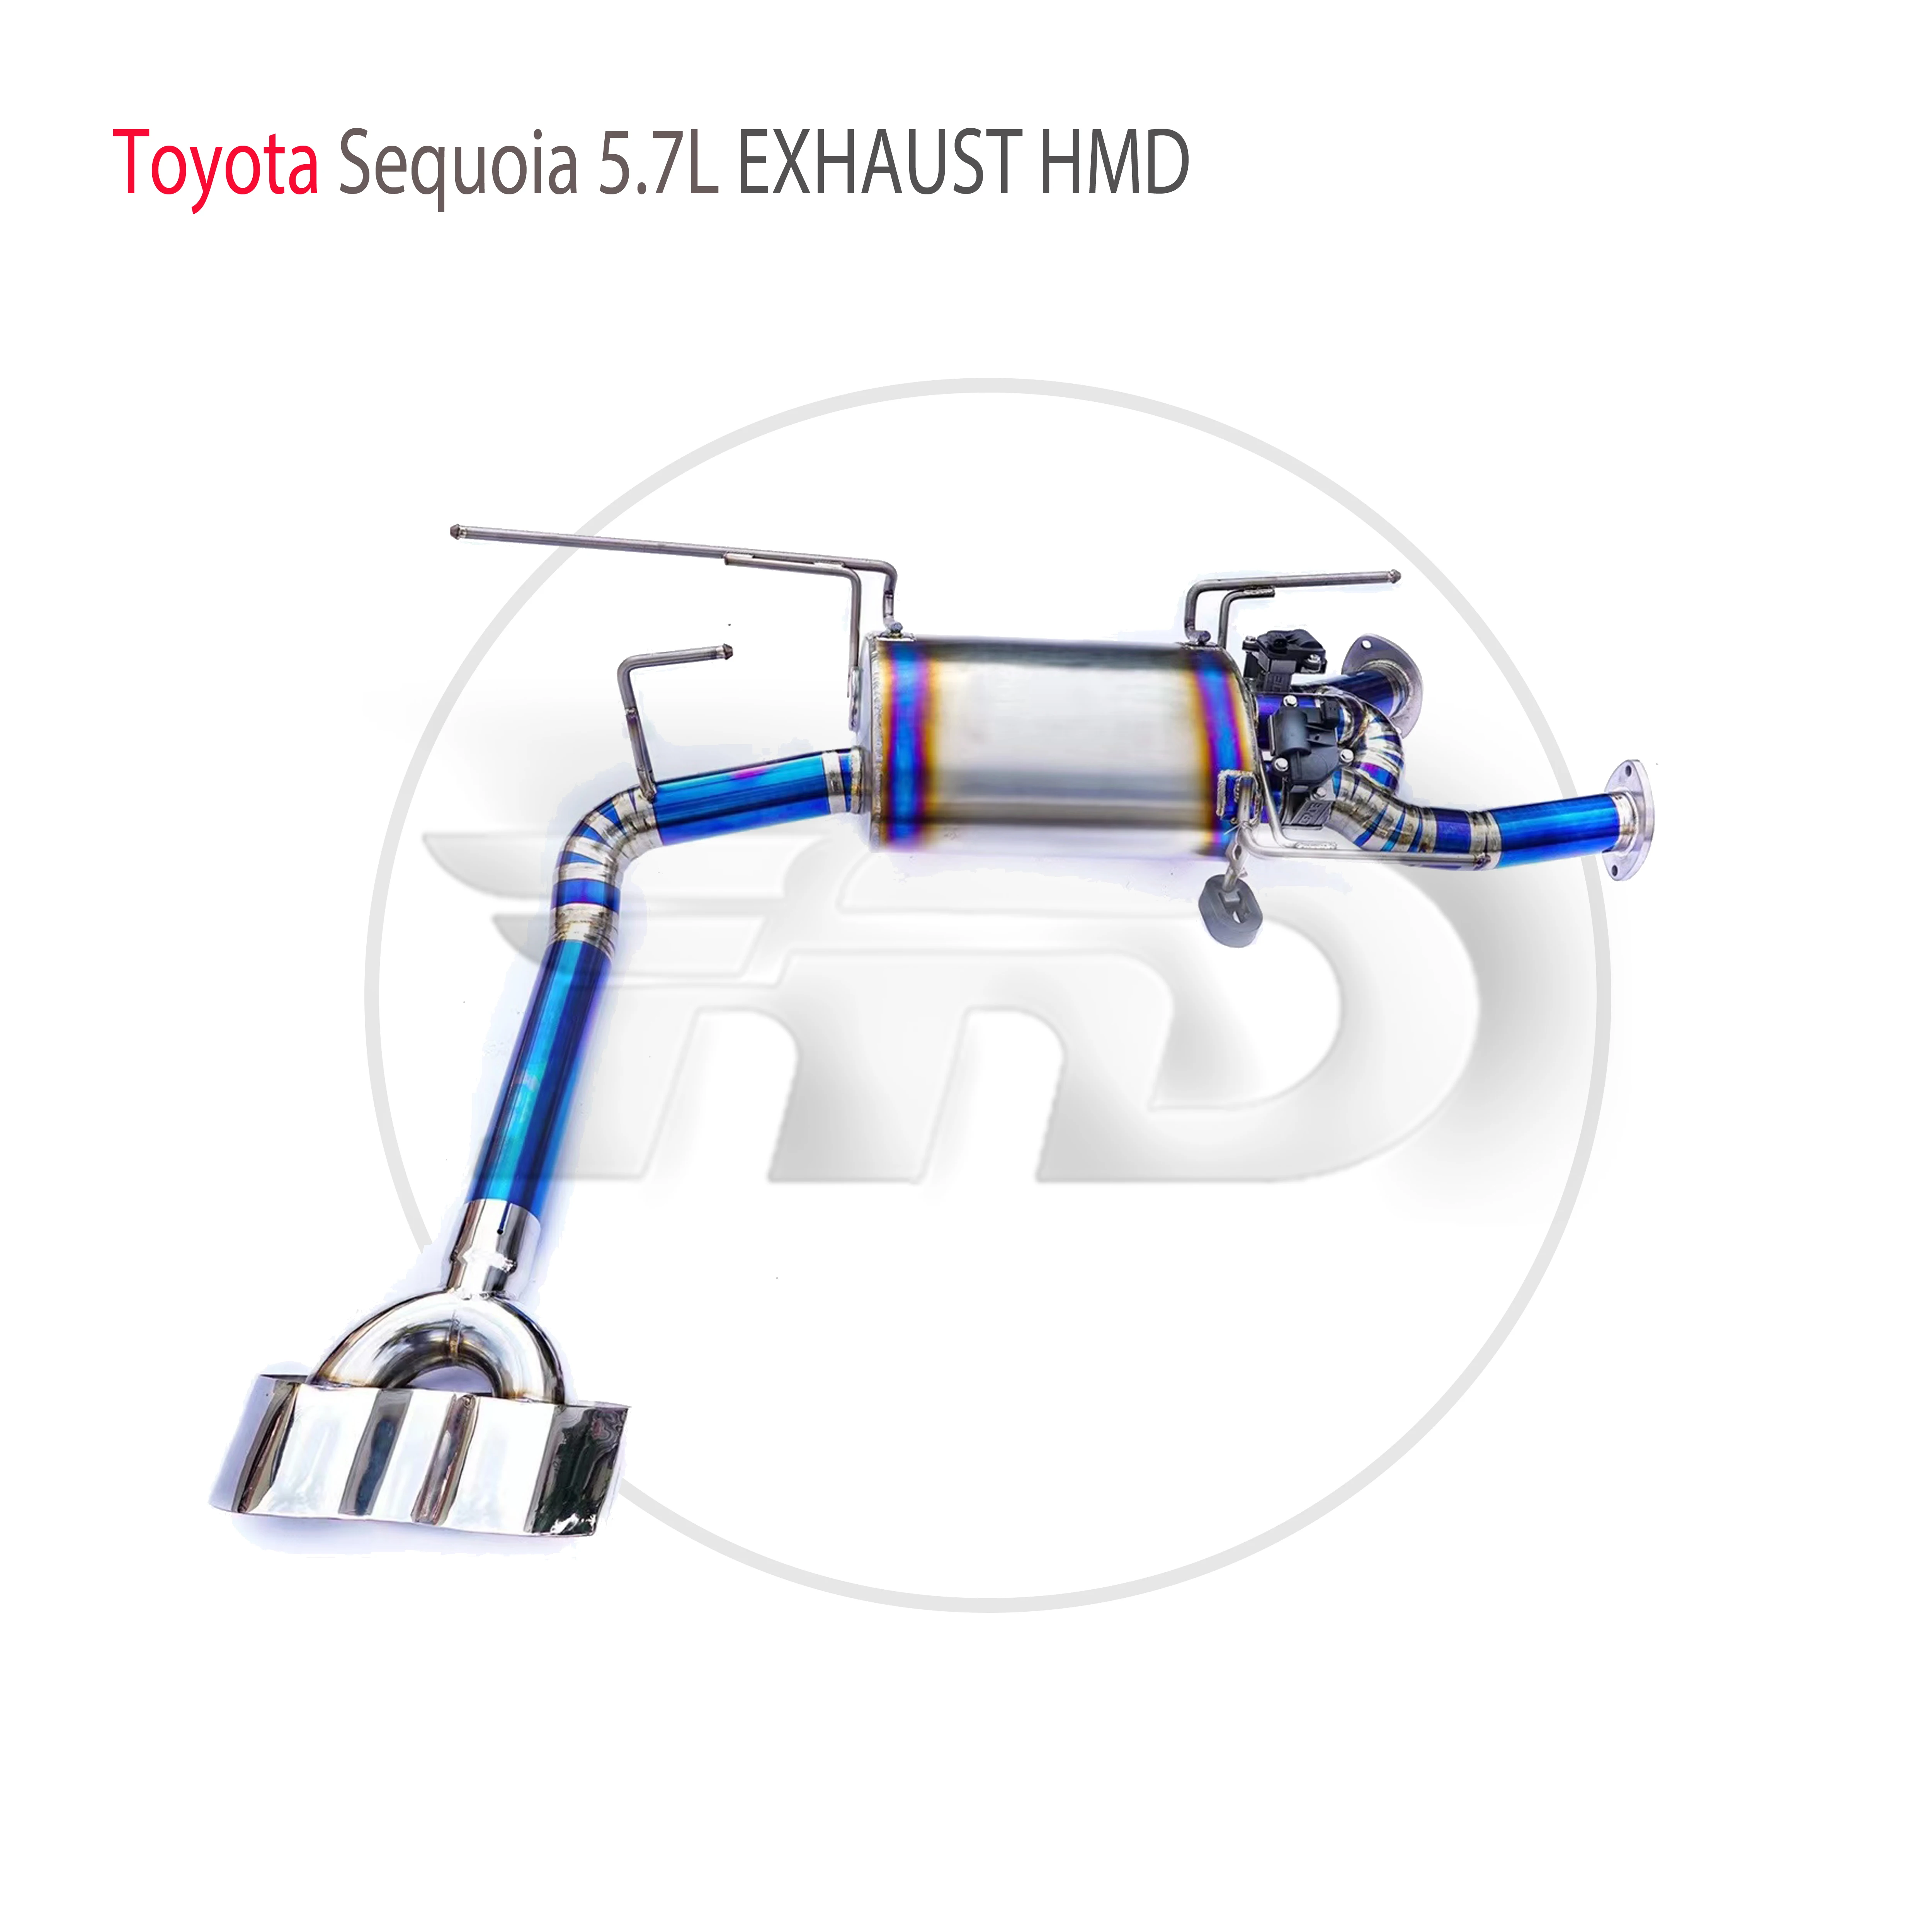 

HMD Titanium Alloy Exhaust System Performance Valve Catback is Suitable For Toyota Sequoia 5.7L Muffler For Cars